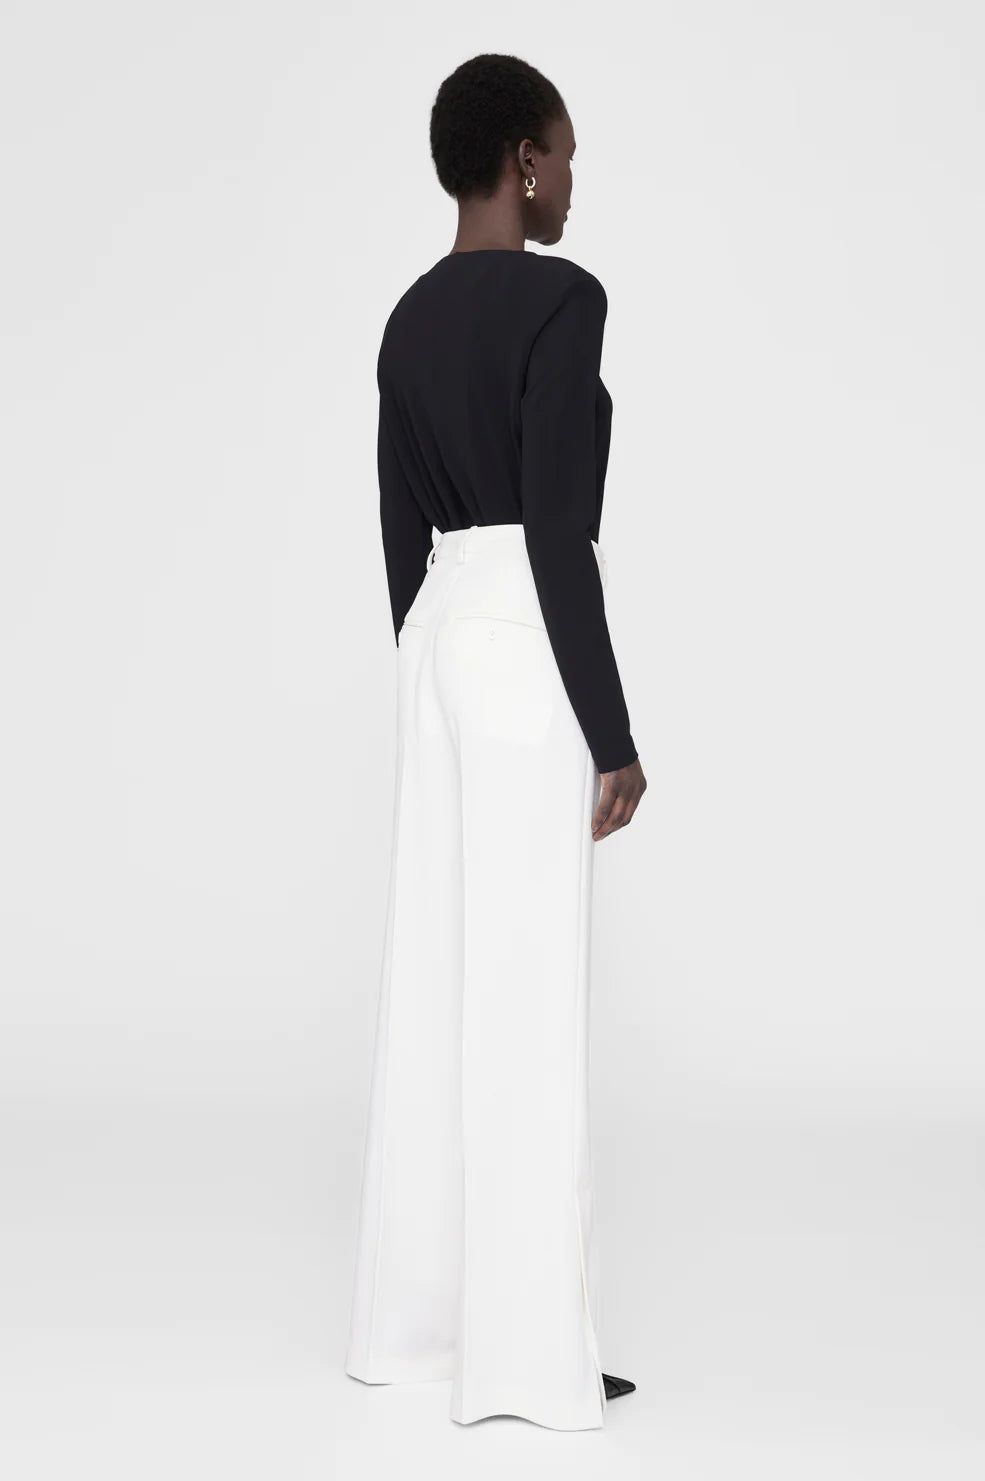 Anine Bing Lyra Pant in Ivory available at The New Trend Australia.